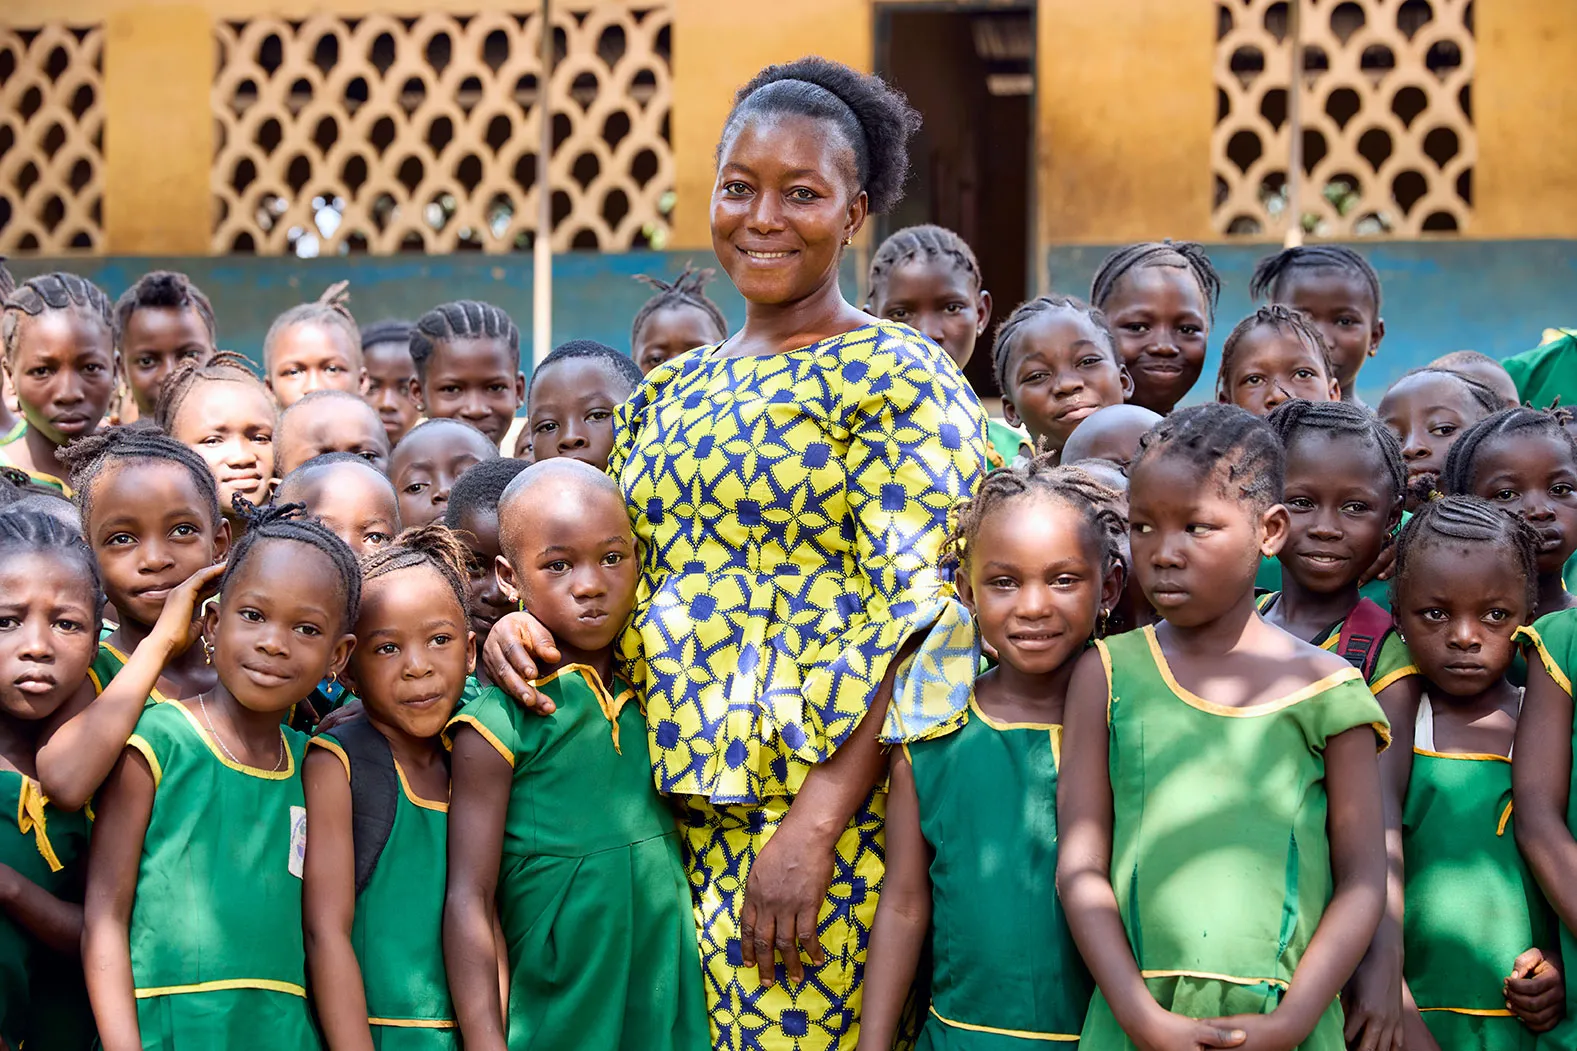 A woman wearing bright yellow is surrounded by children wearing green school uniforms.